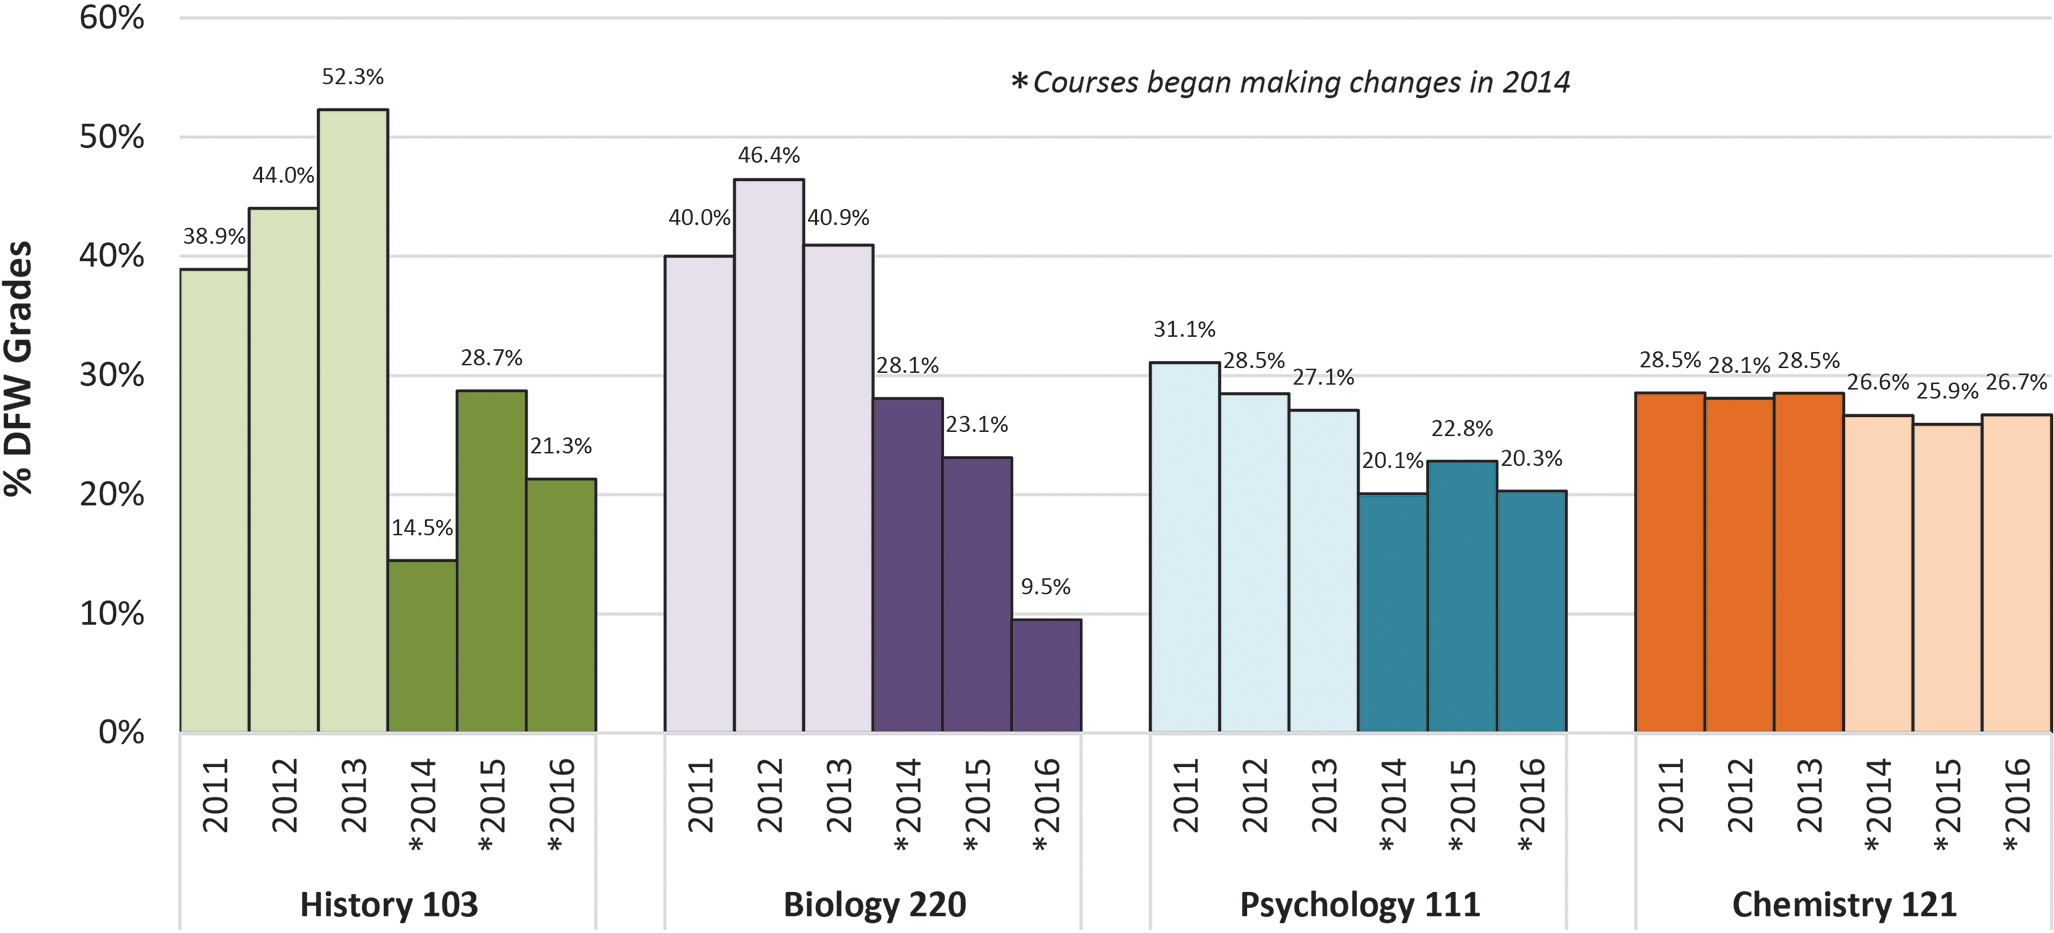 Percentage of students receiving a grade of D, F, or W (DFW) in history, biology, psychology, and chemistry gateway courses from 2011 to 2016 at North Dakota State University.